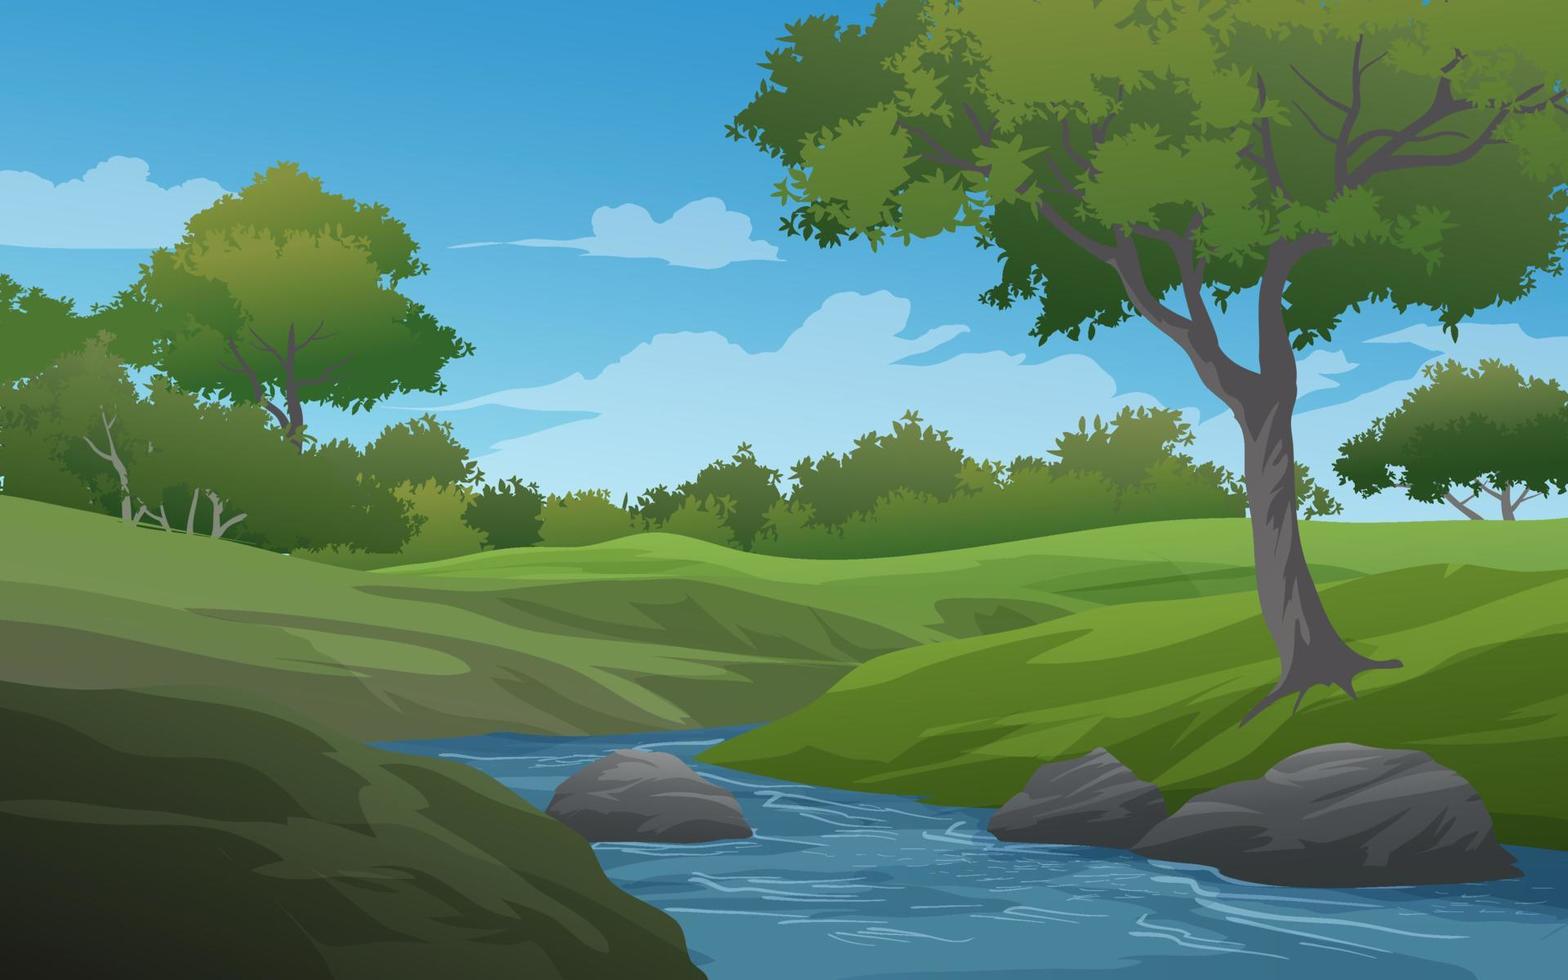 Landscape of forest and river in countryside vector